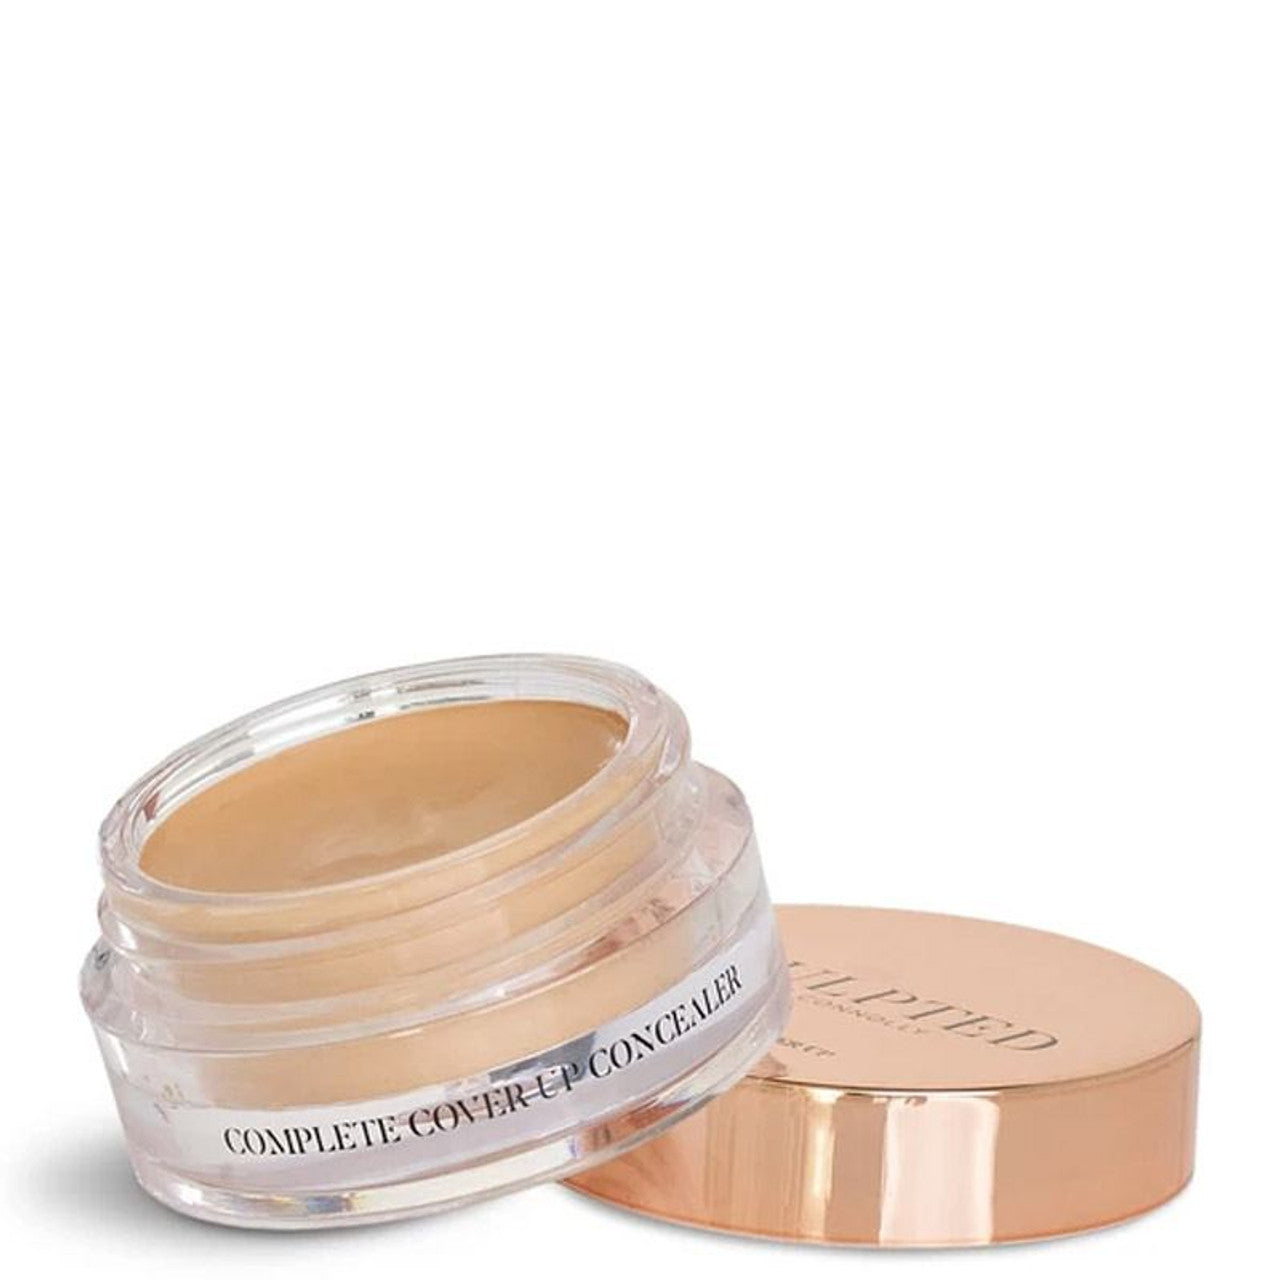 Sculpted by Aimee - Complete Cover Up Concealer - Medium 4.0